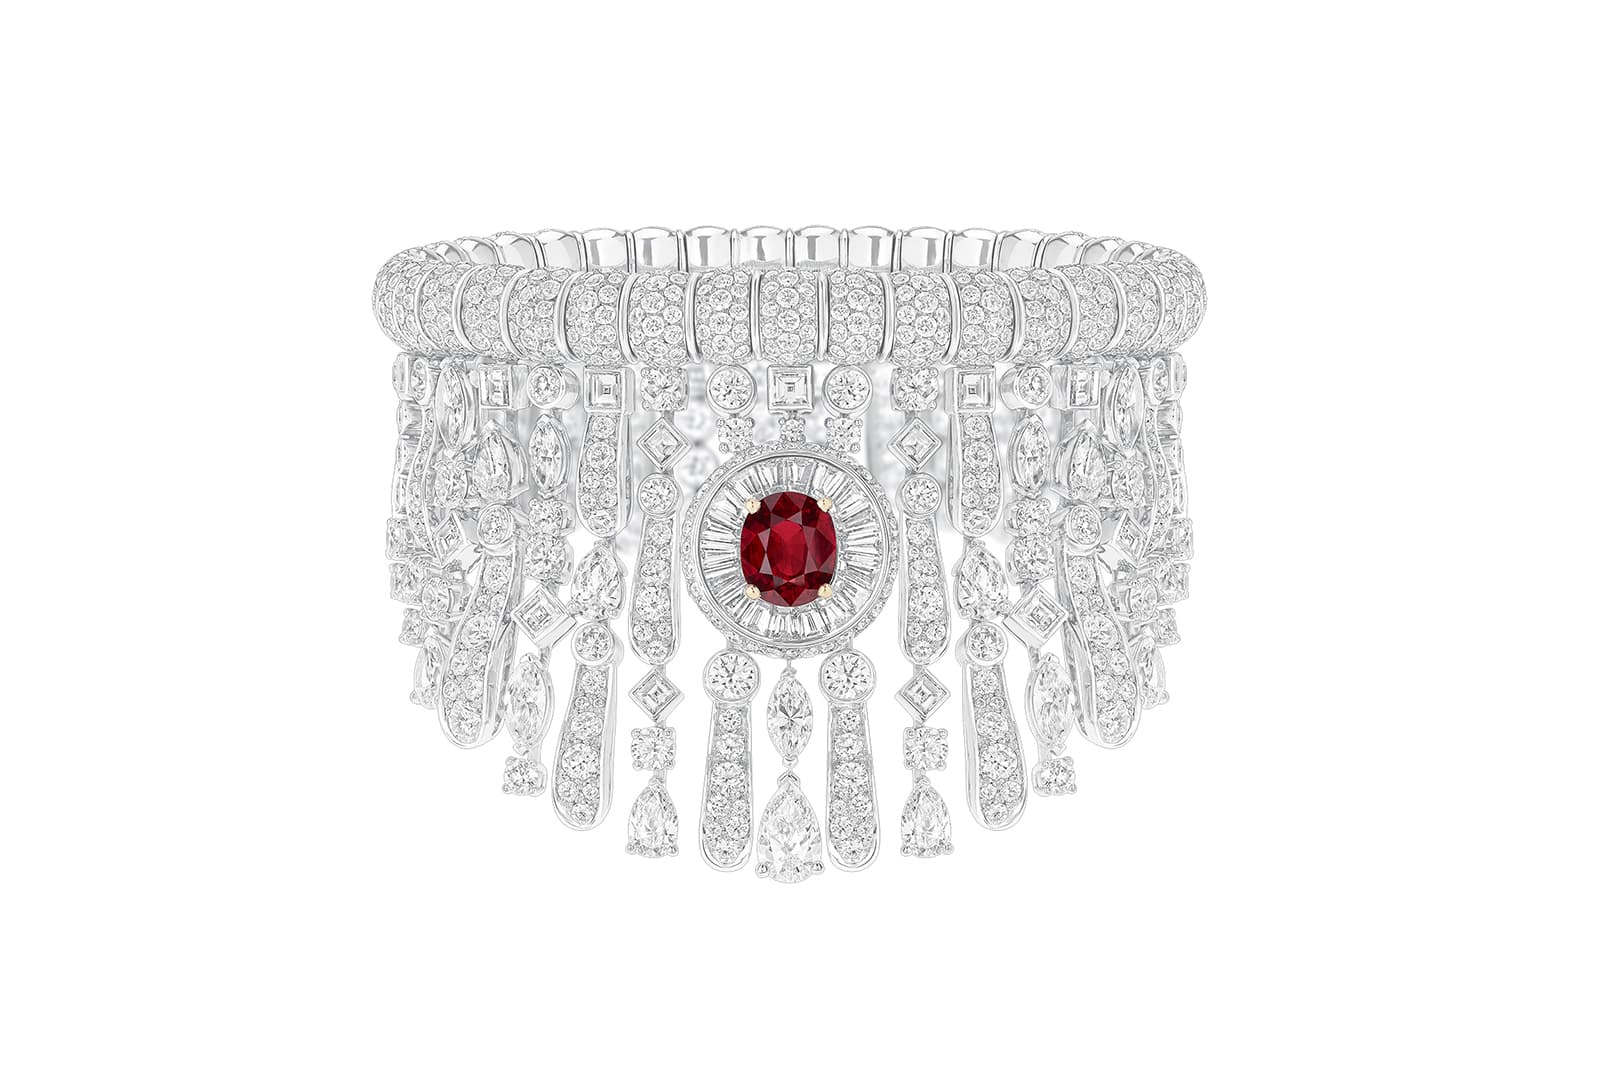 Louis Vuitton's high jewellery pays homage to powerful women